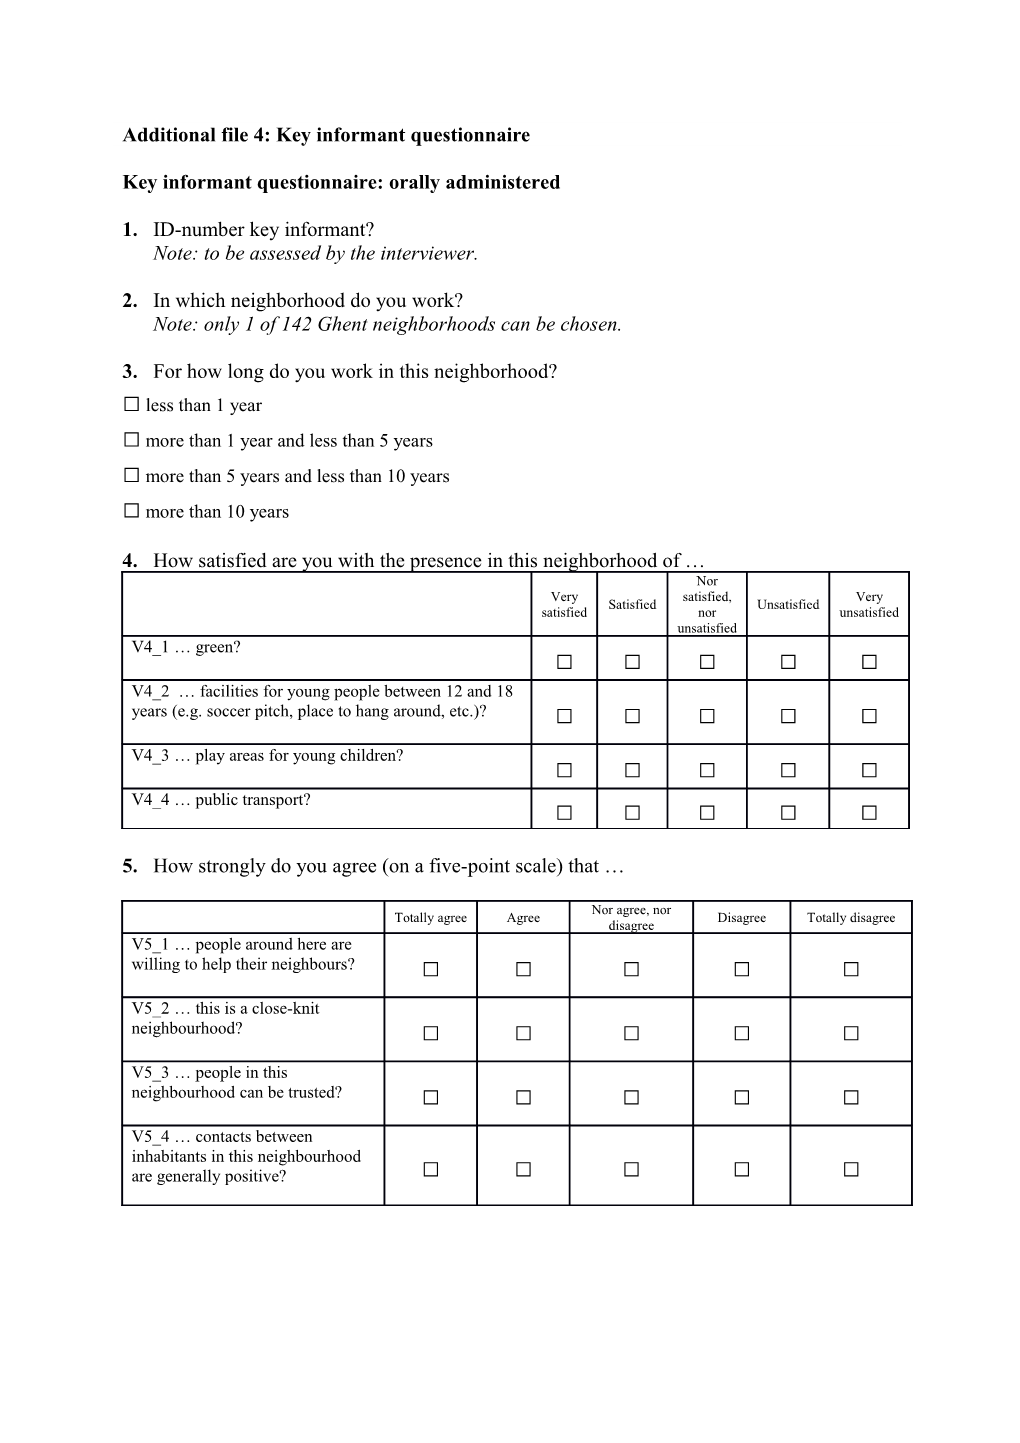 Key Informant Questionnaire: Orally Administered